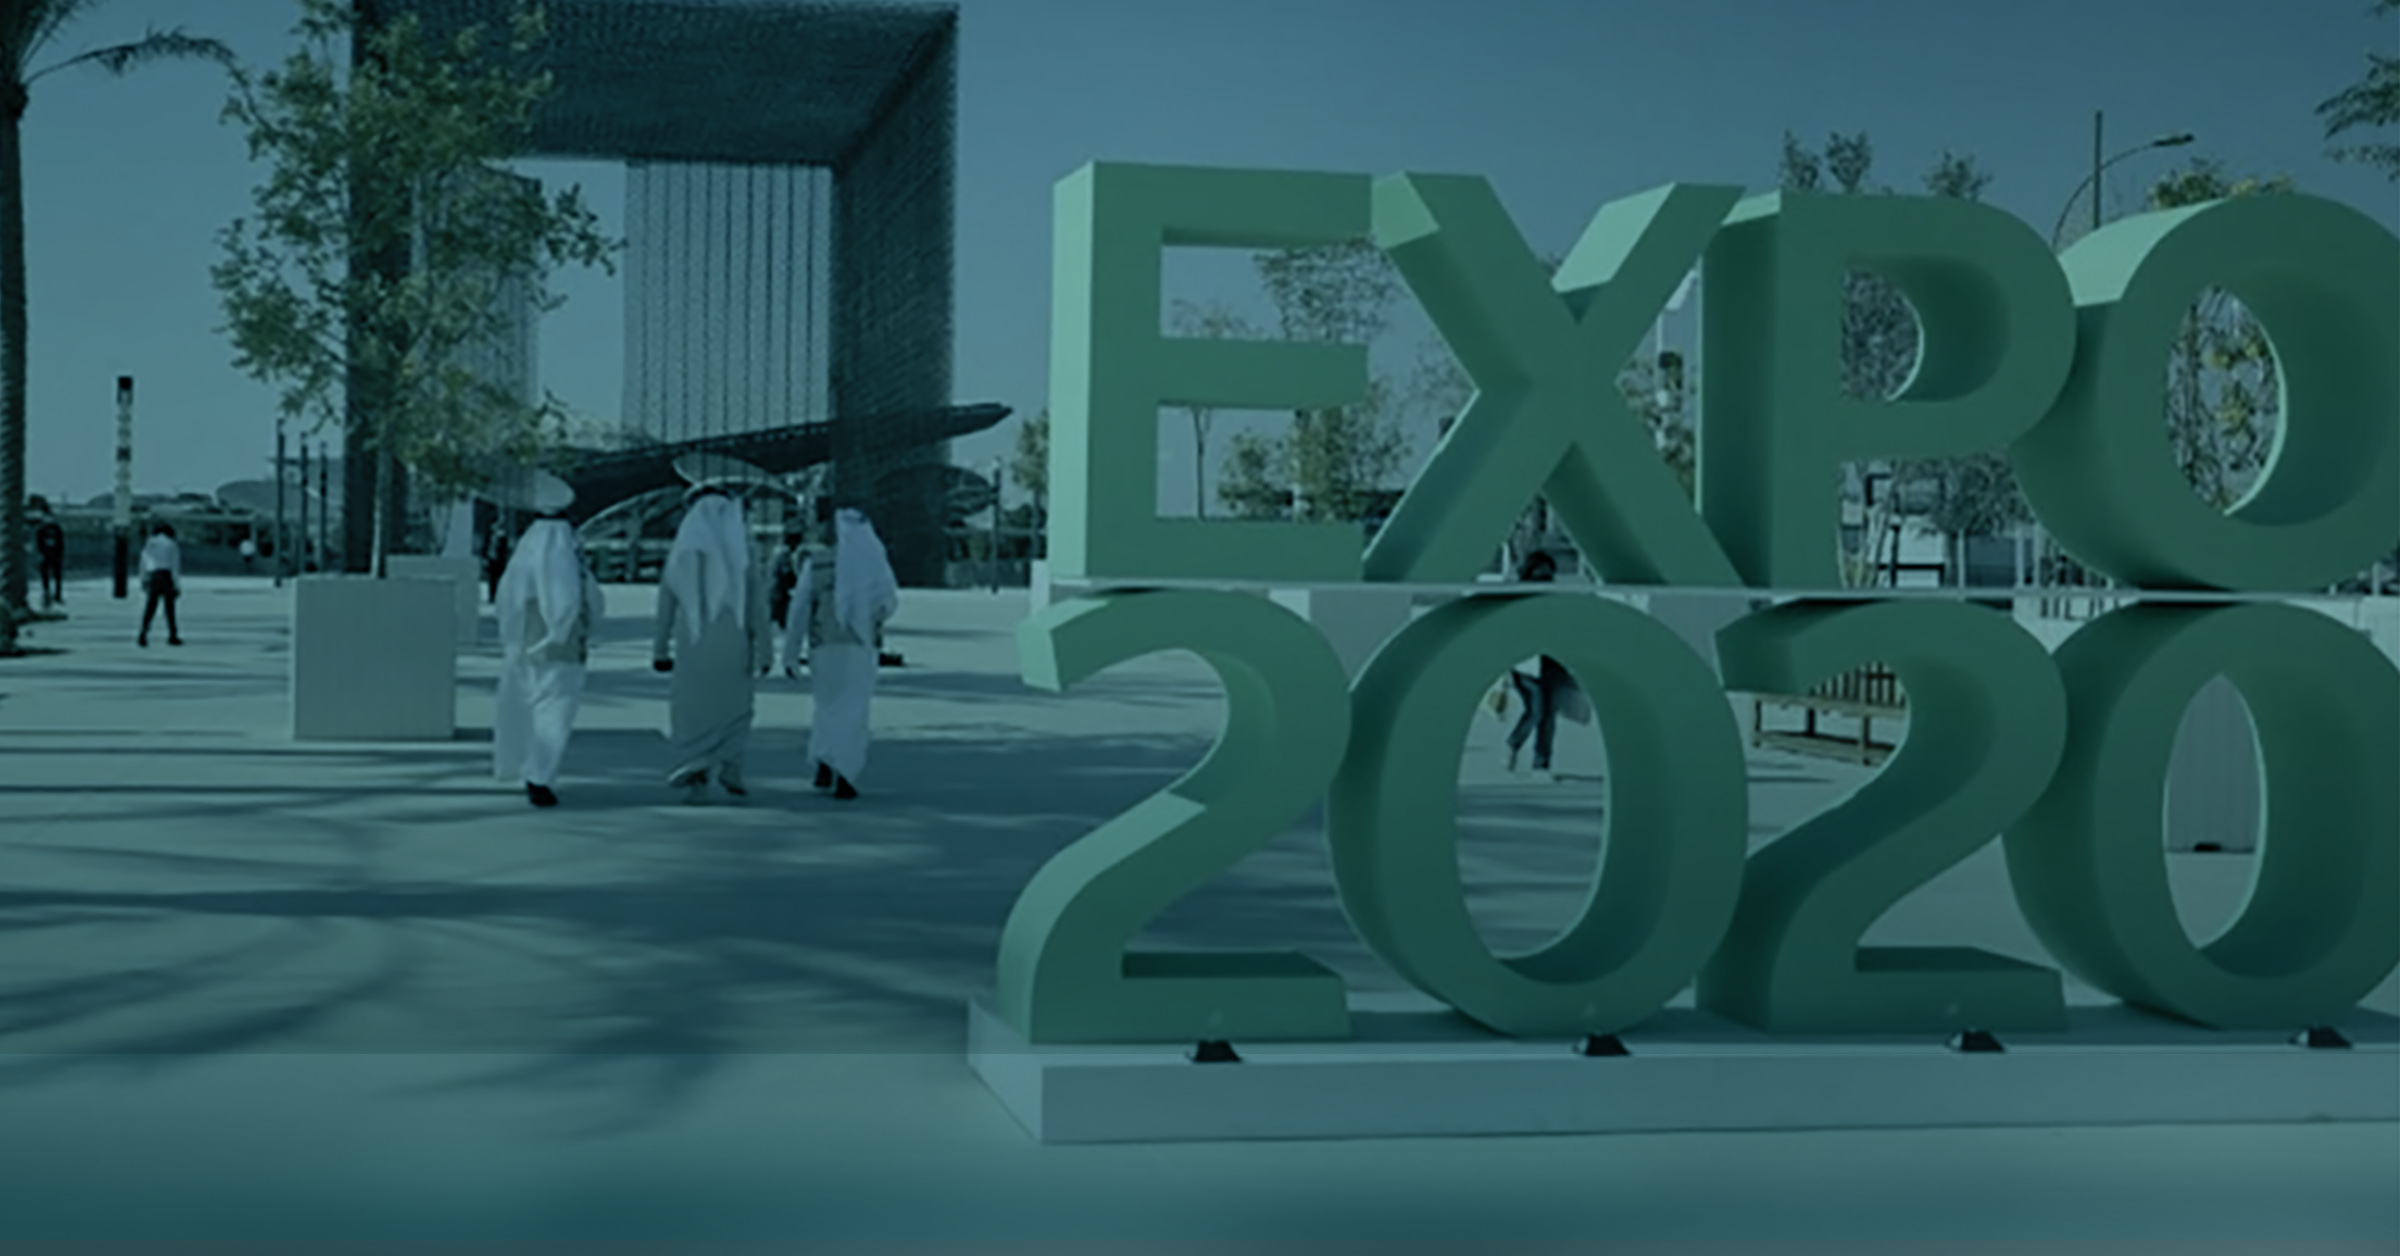 Cedar Oxygen: Business Networking Event to Promote the “MADE IN LEBANON” for the first time at Expo 2020